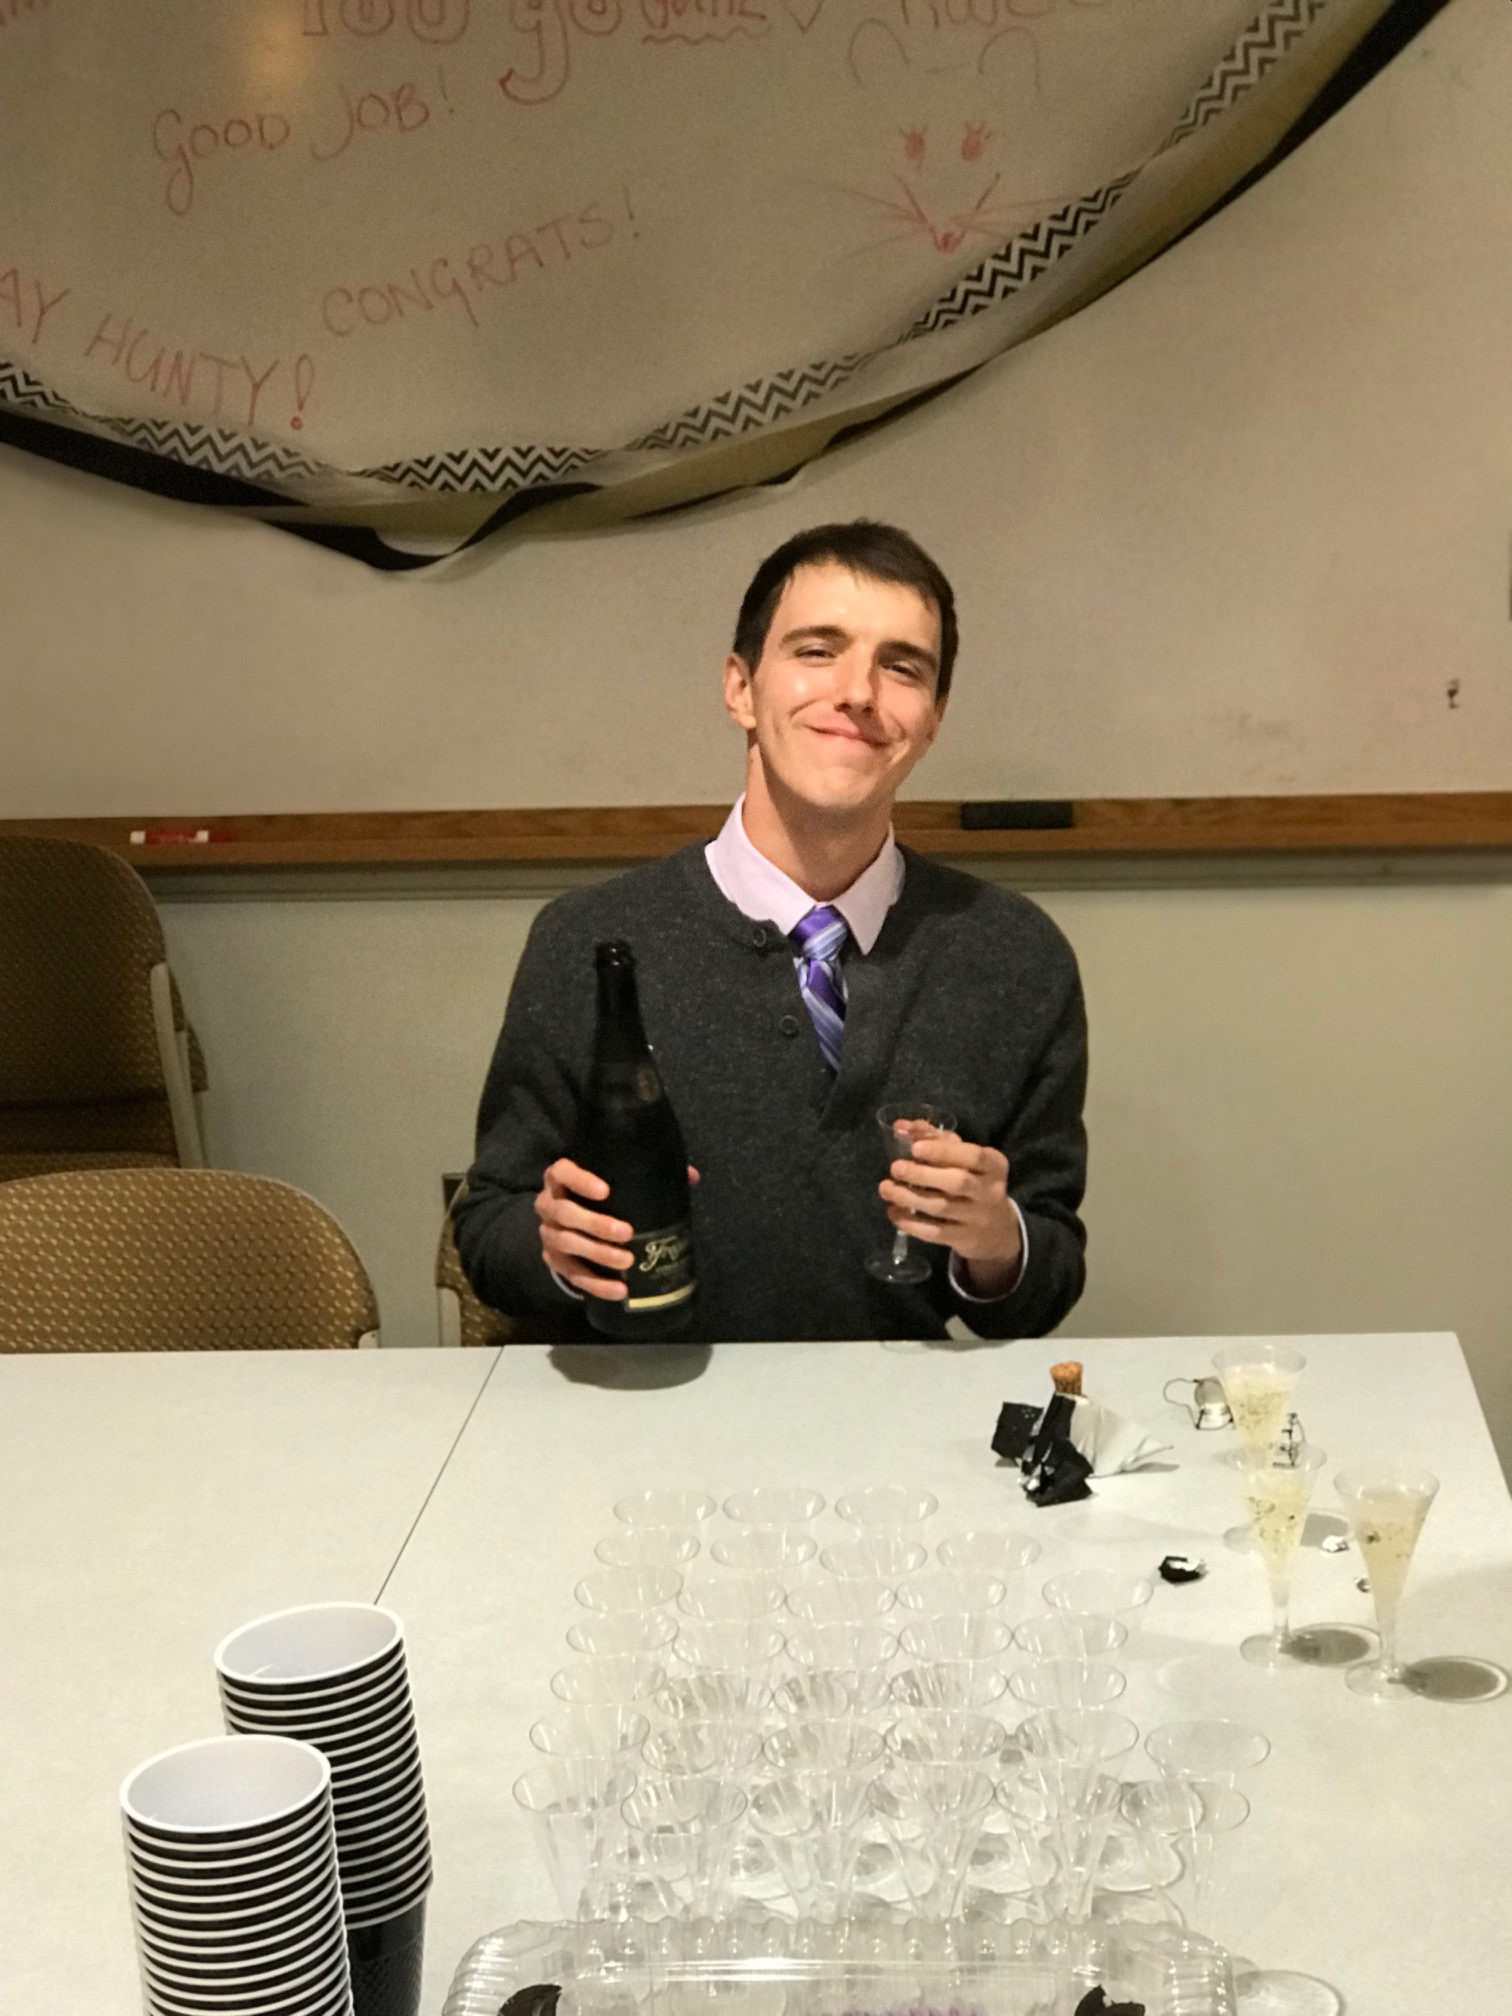 Ben smiling with champagne